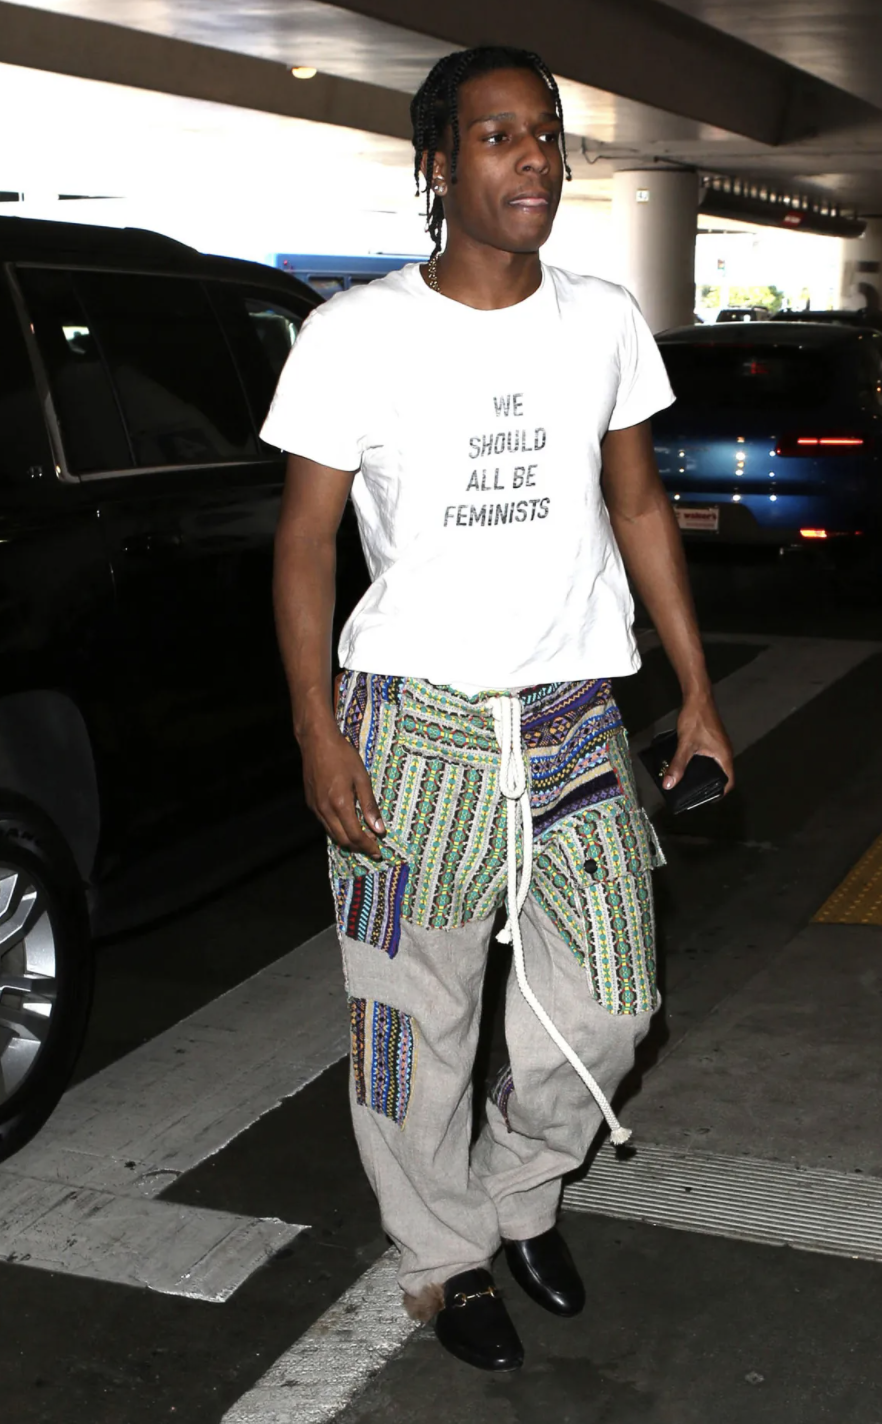 ASAP Rocky Fashion and Outfits - A$AP Rocky Favorite Designers